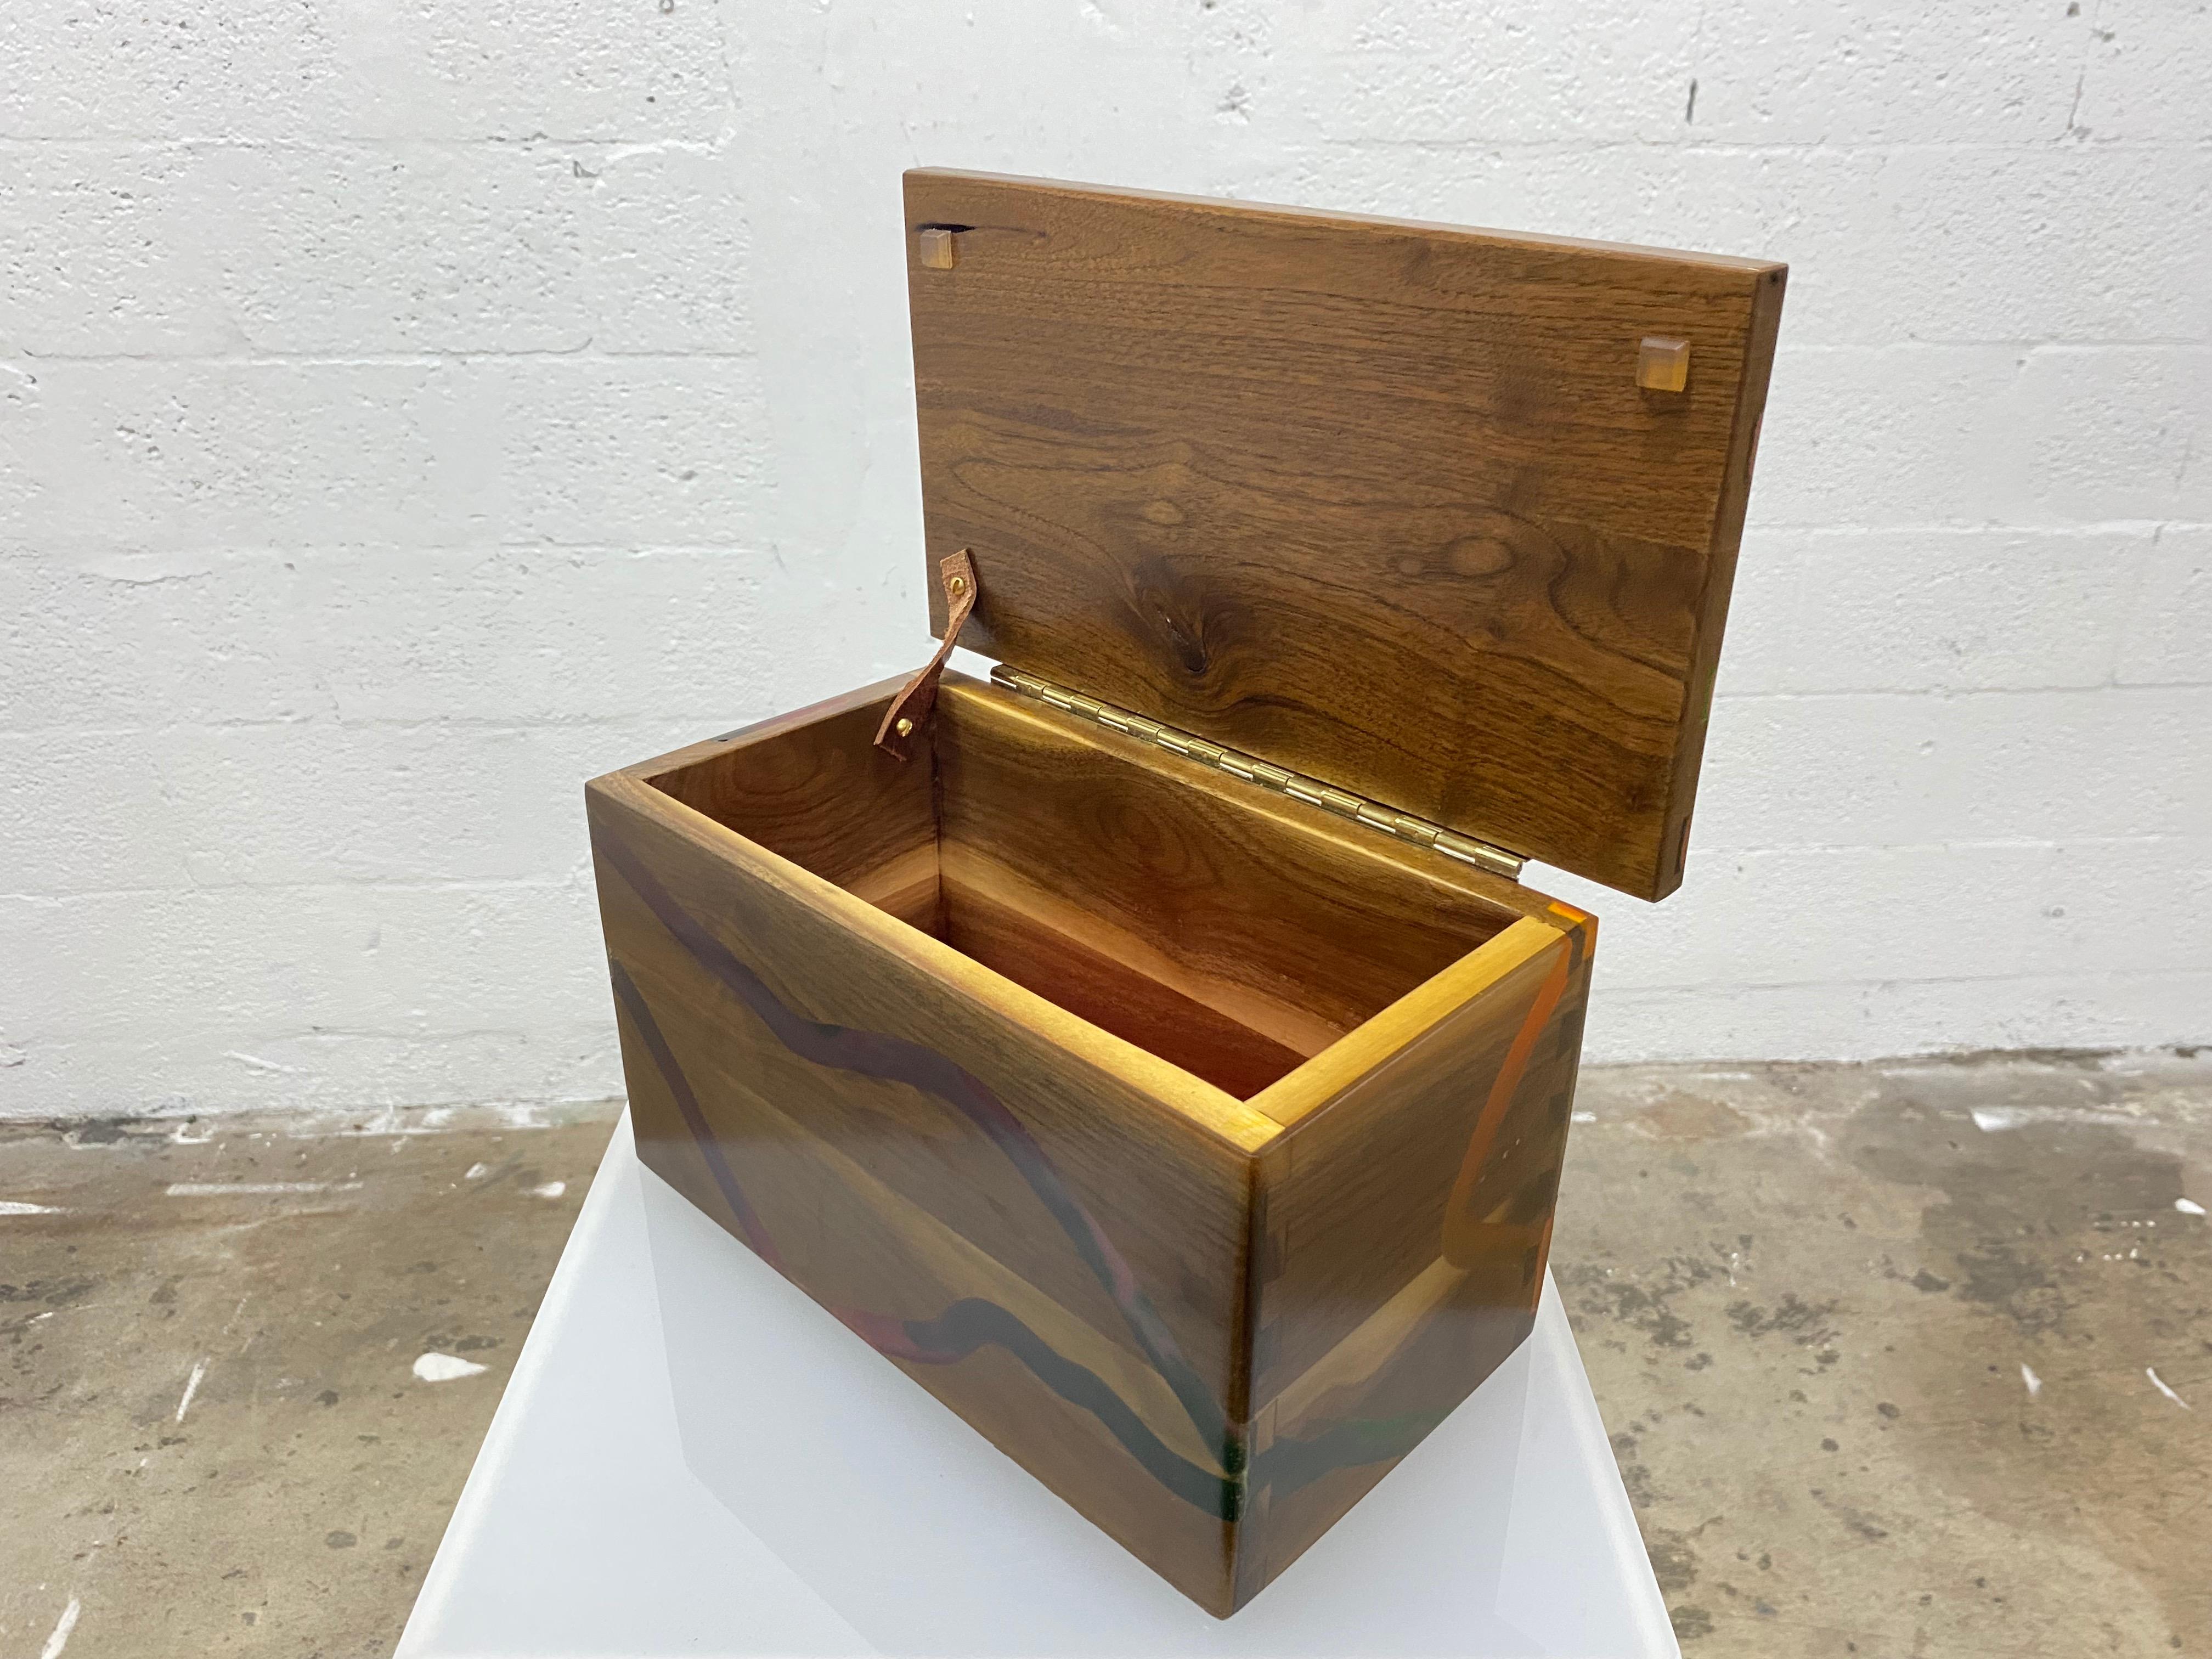 color pour stash storage box with resin coating